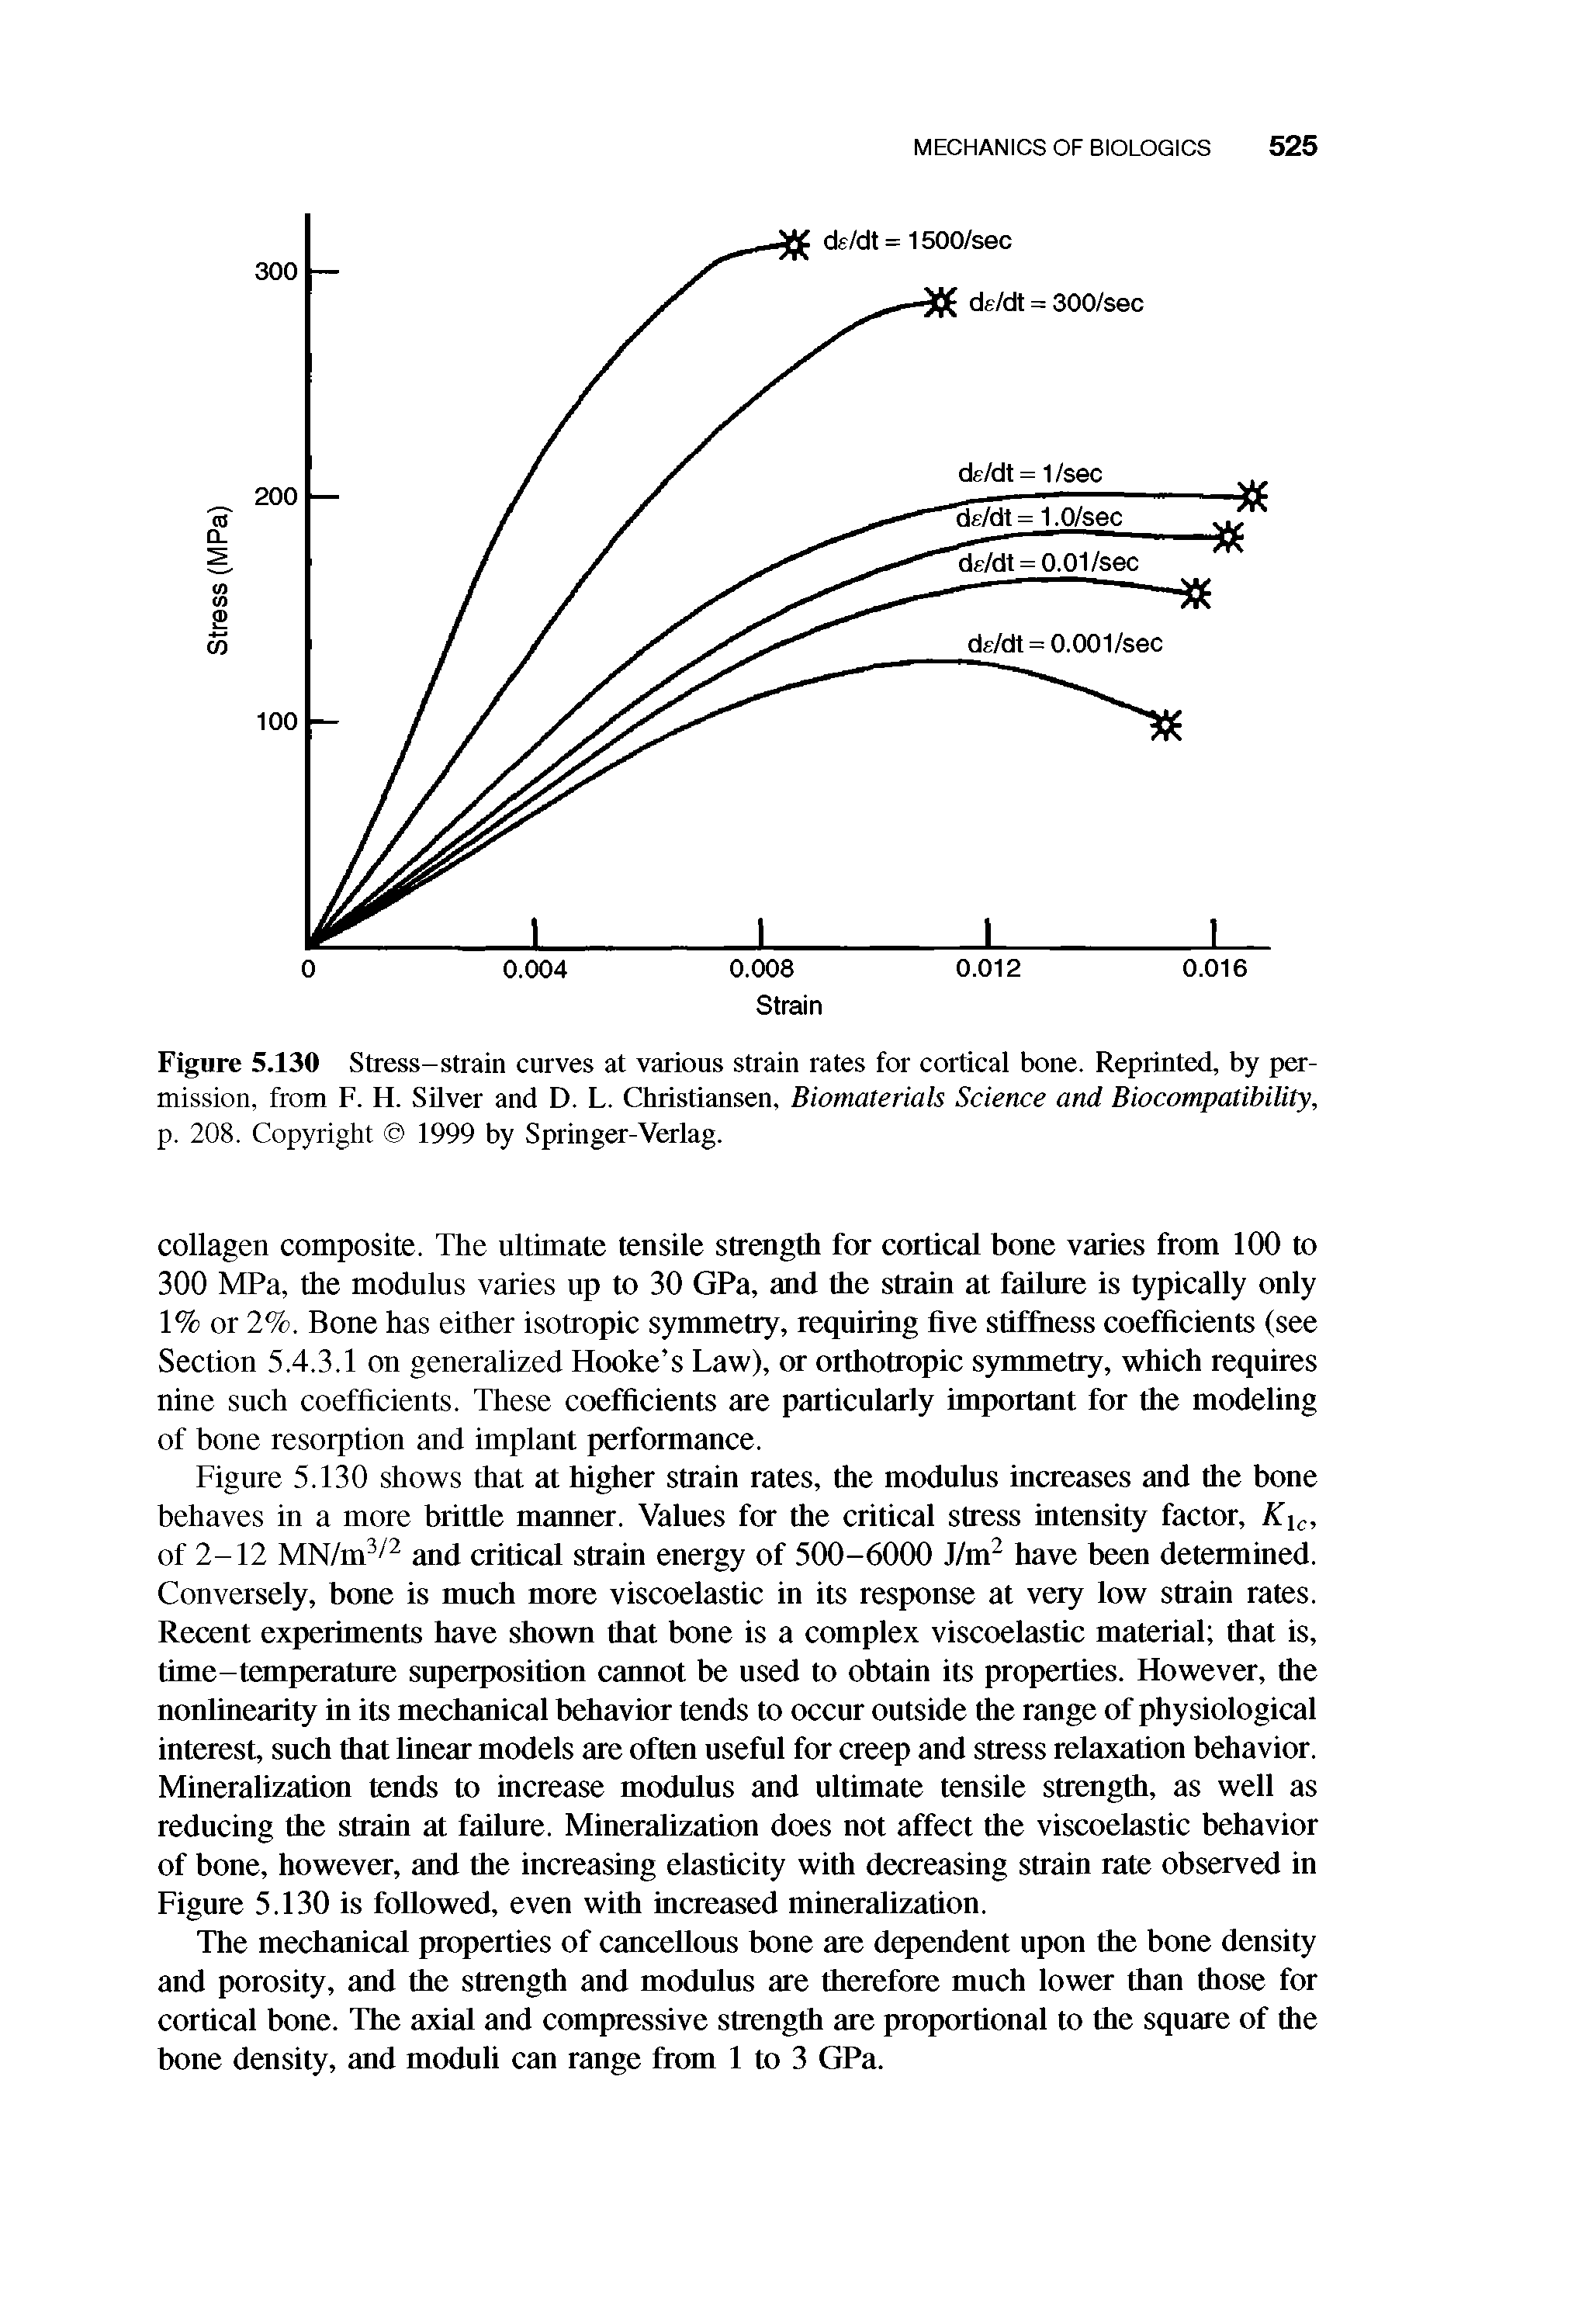 Figure 5.130 Stress-strain curves at various strain rates for cortical bone. Reprinted, by permission, from F. H. Silver and D. L. Christiansen, Biomaterials Science and Biocompatibility, p. 208. Copyright 1999 by Springer-Verlag.